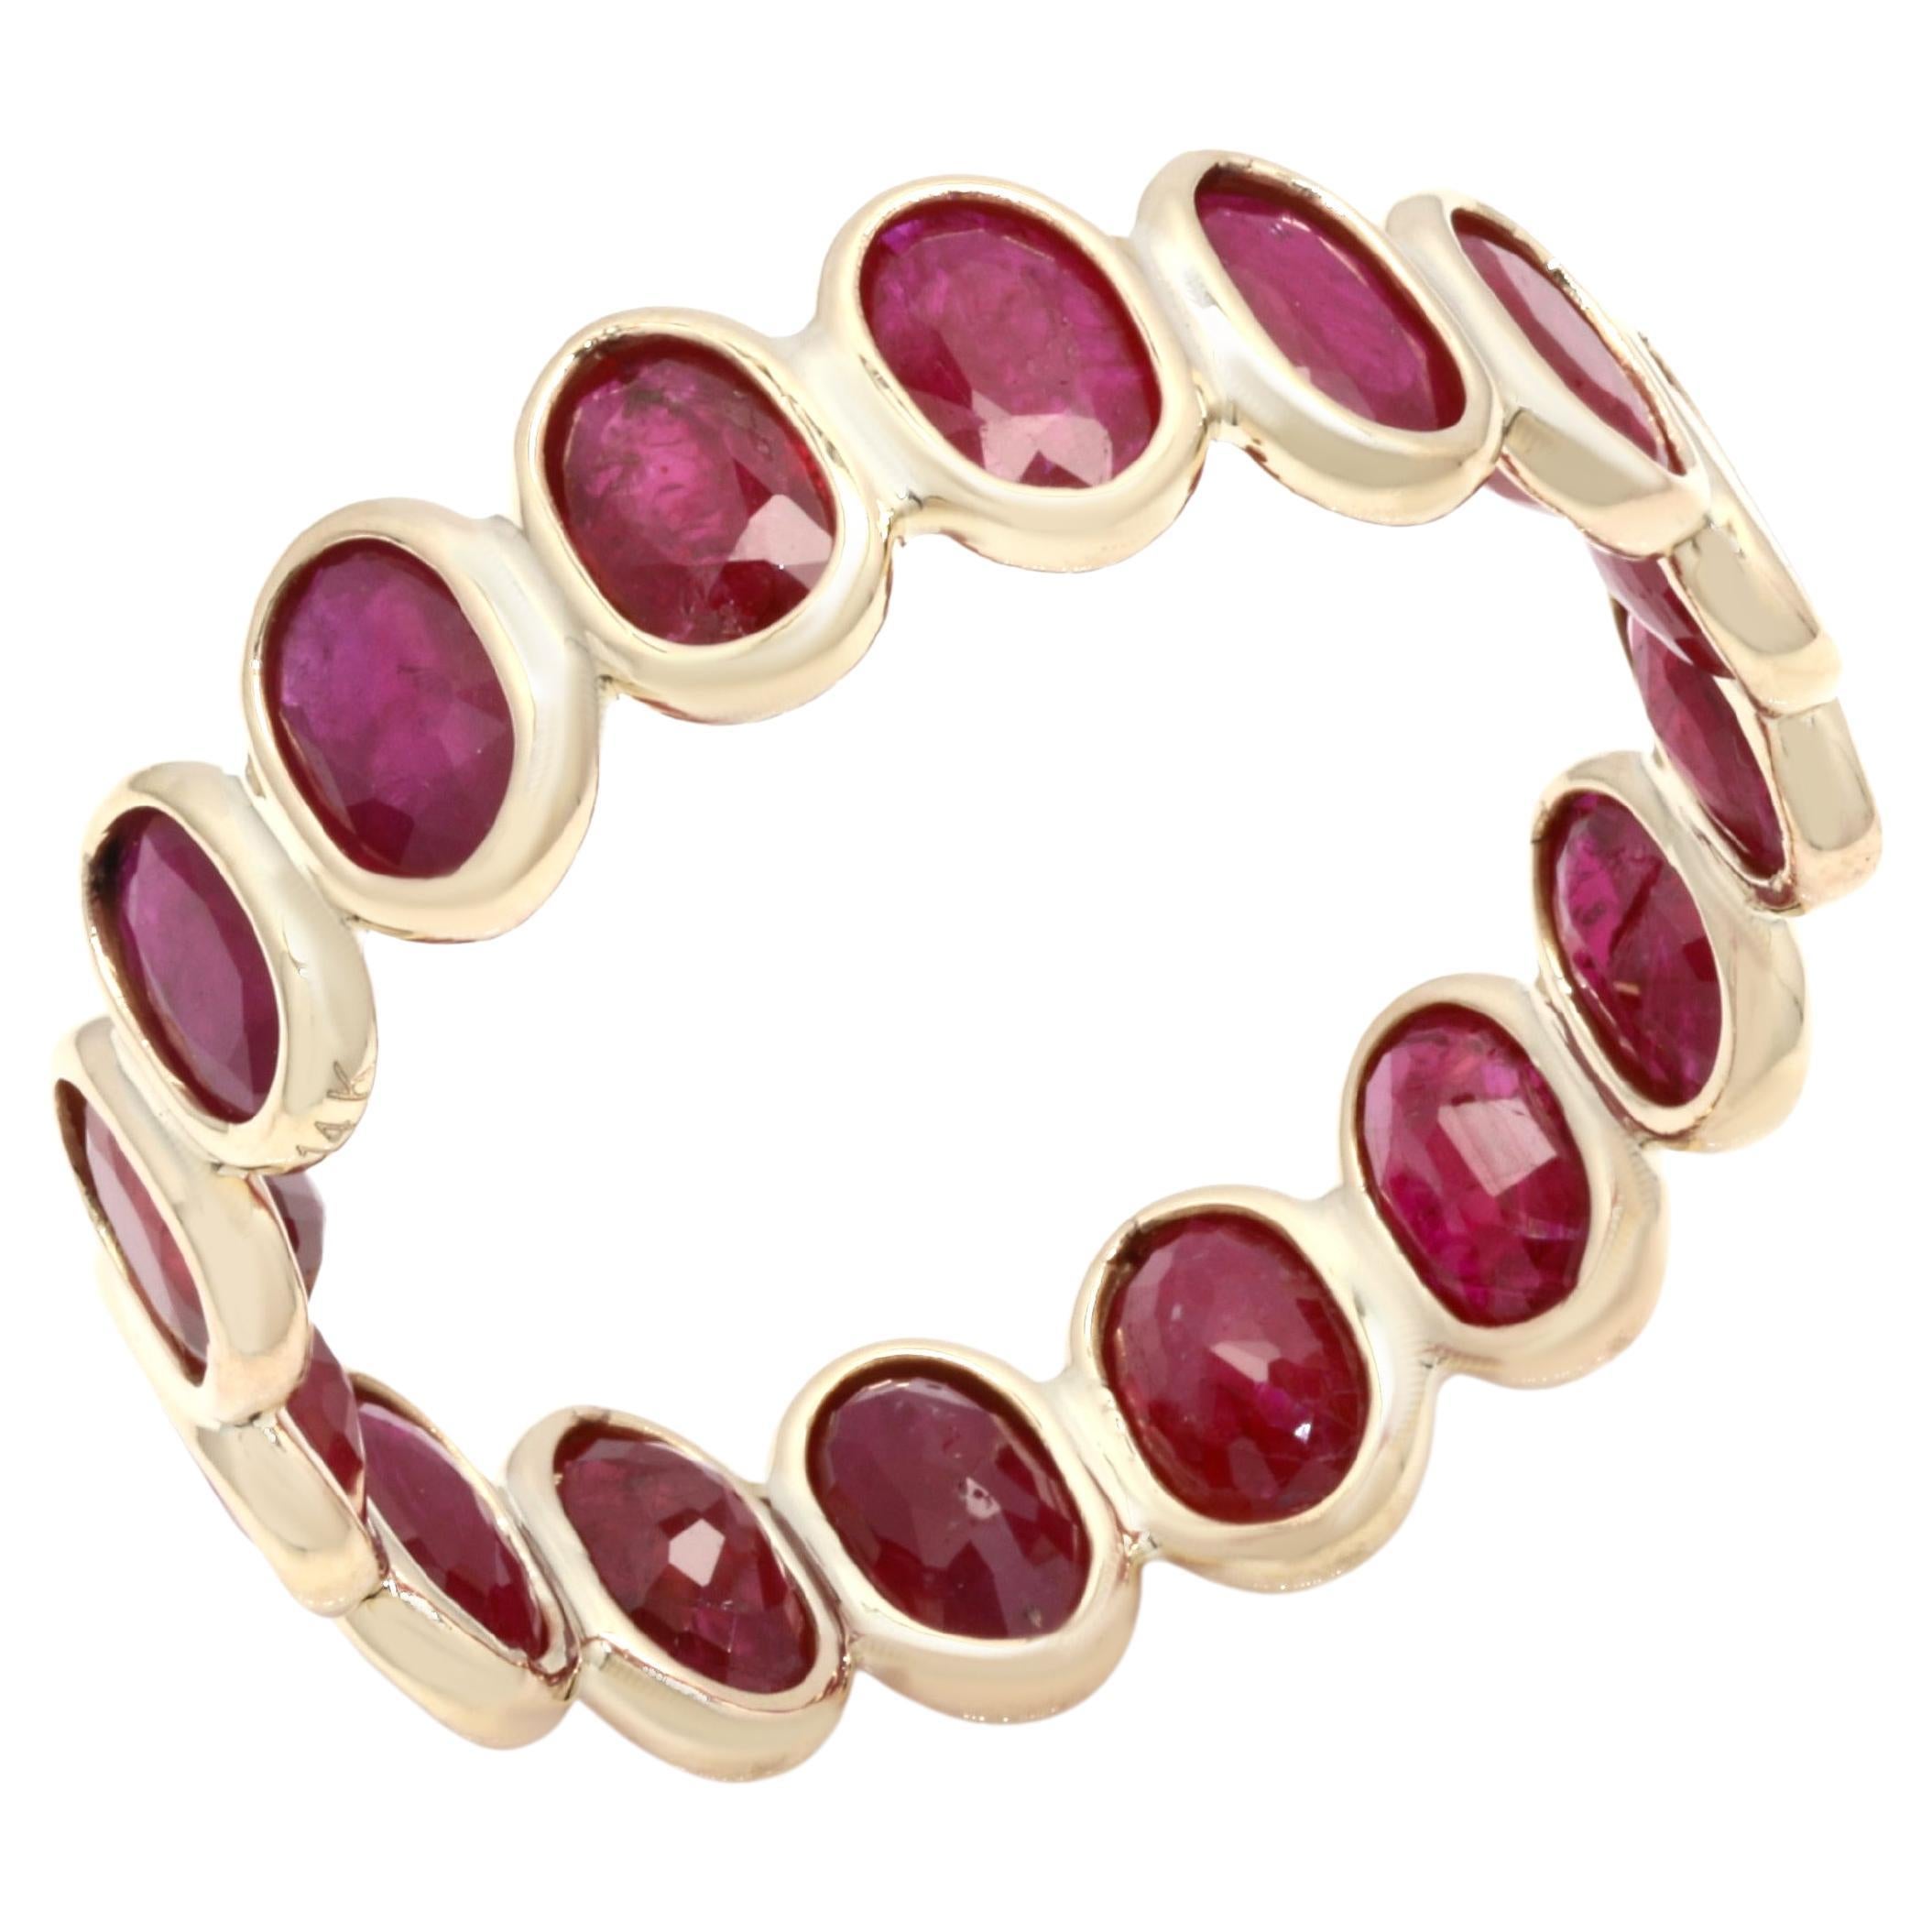 For Sale:  Stackable 4.43 Ct Oval Red Ruby Eternity Band Ring Mounted in 14K Yellow Gold